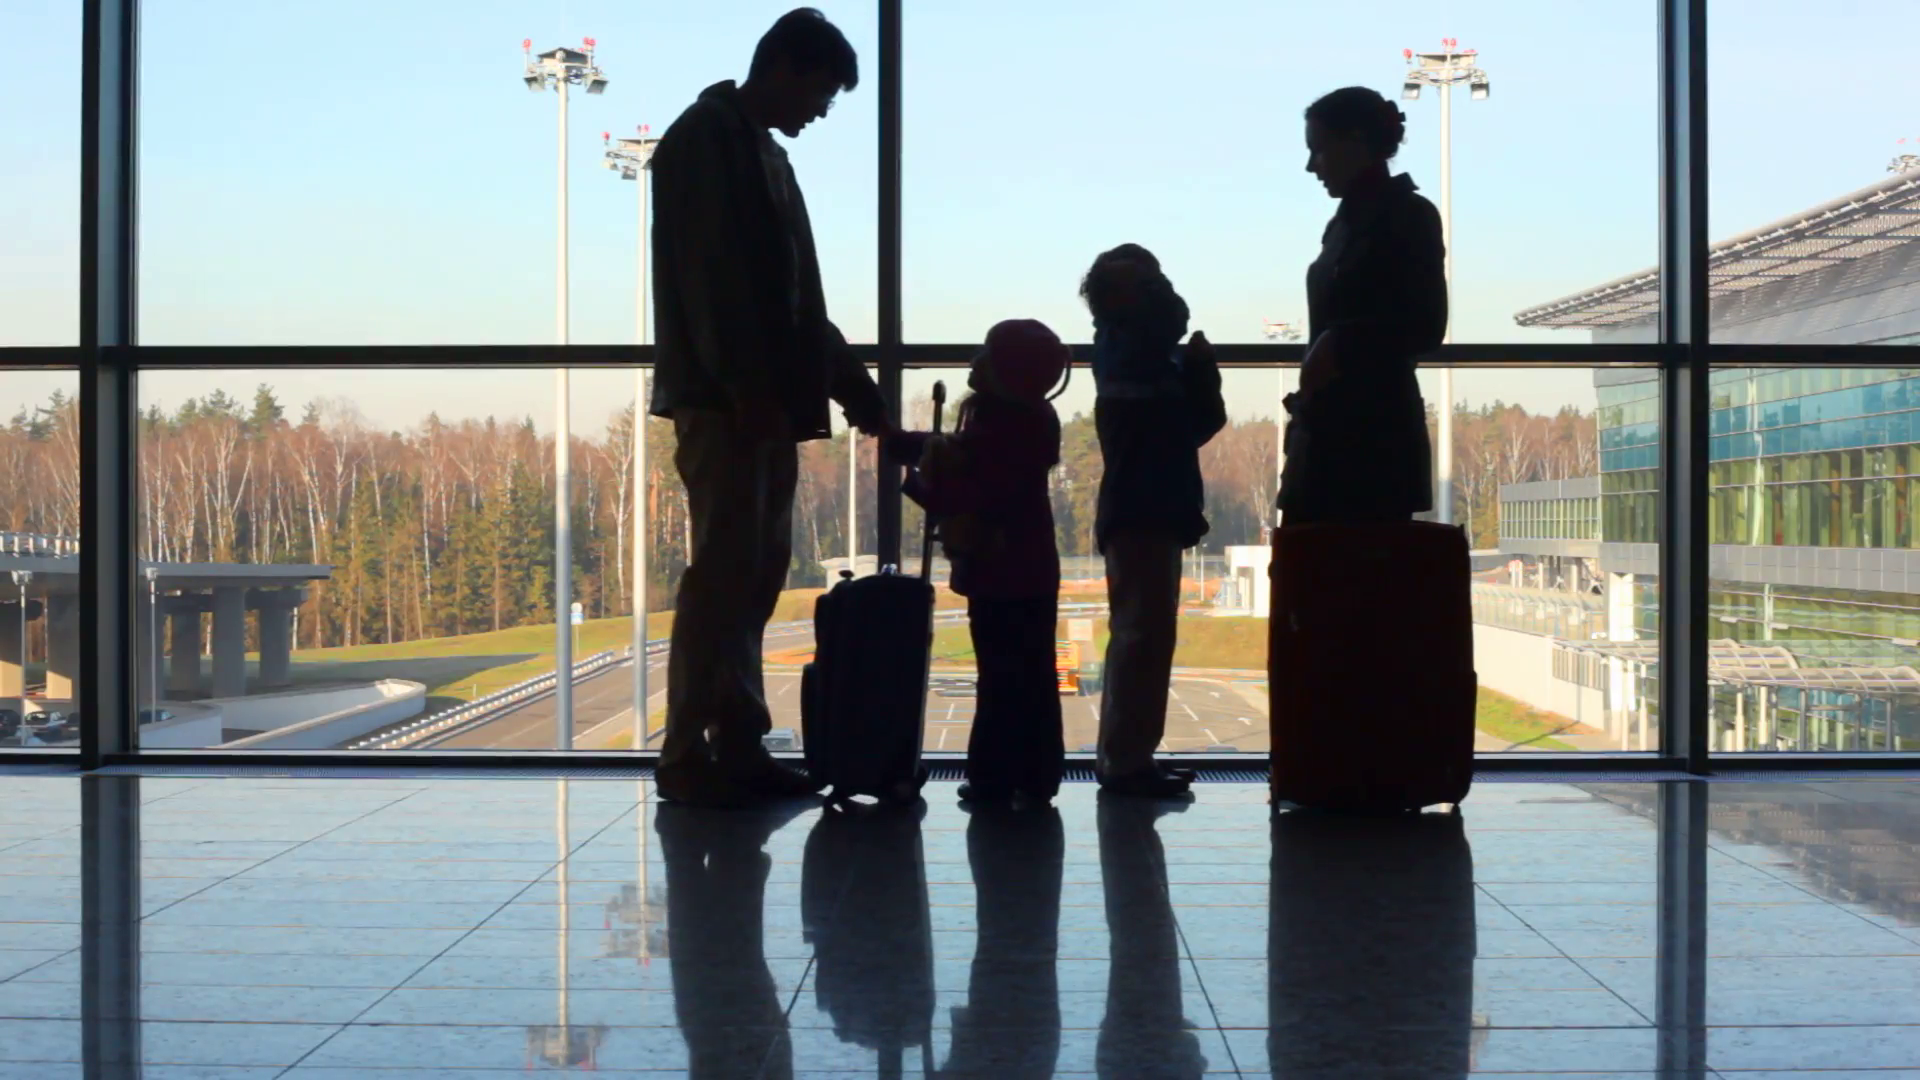 family-stands-against-window-at-airport_7khajhud__F0000